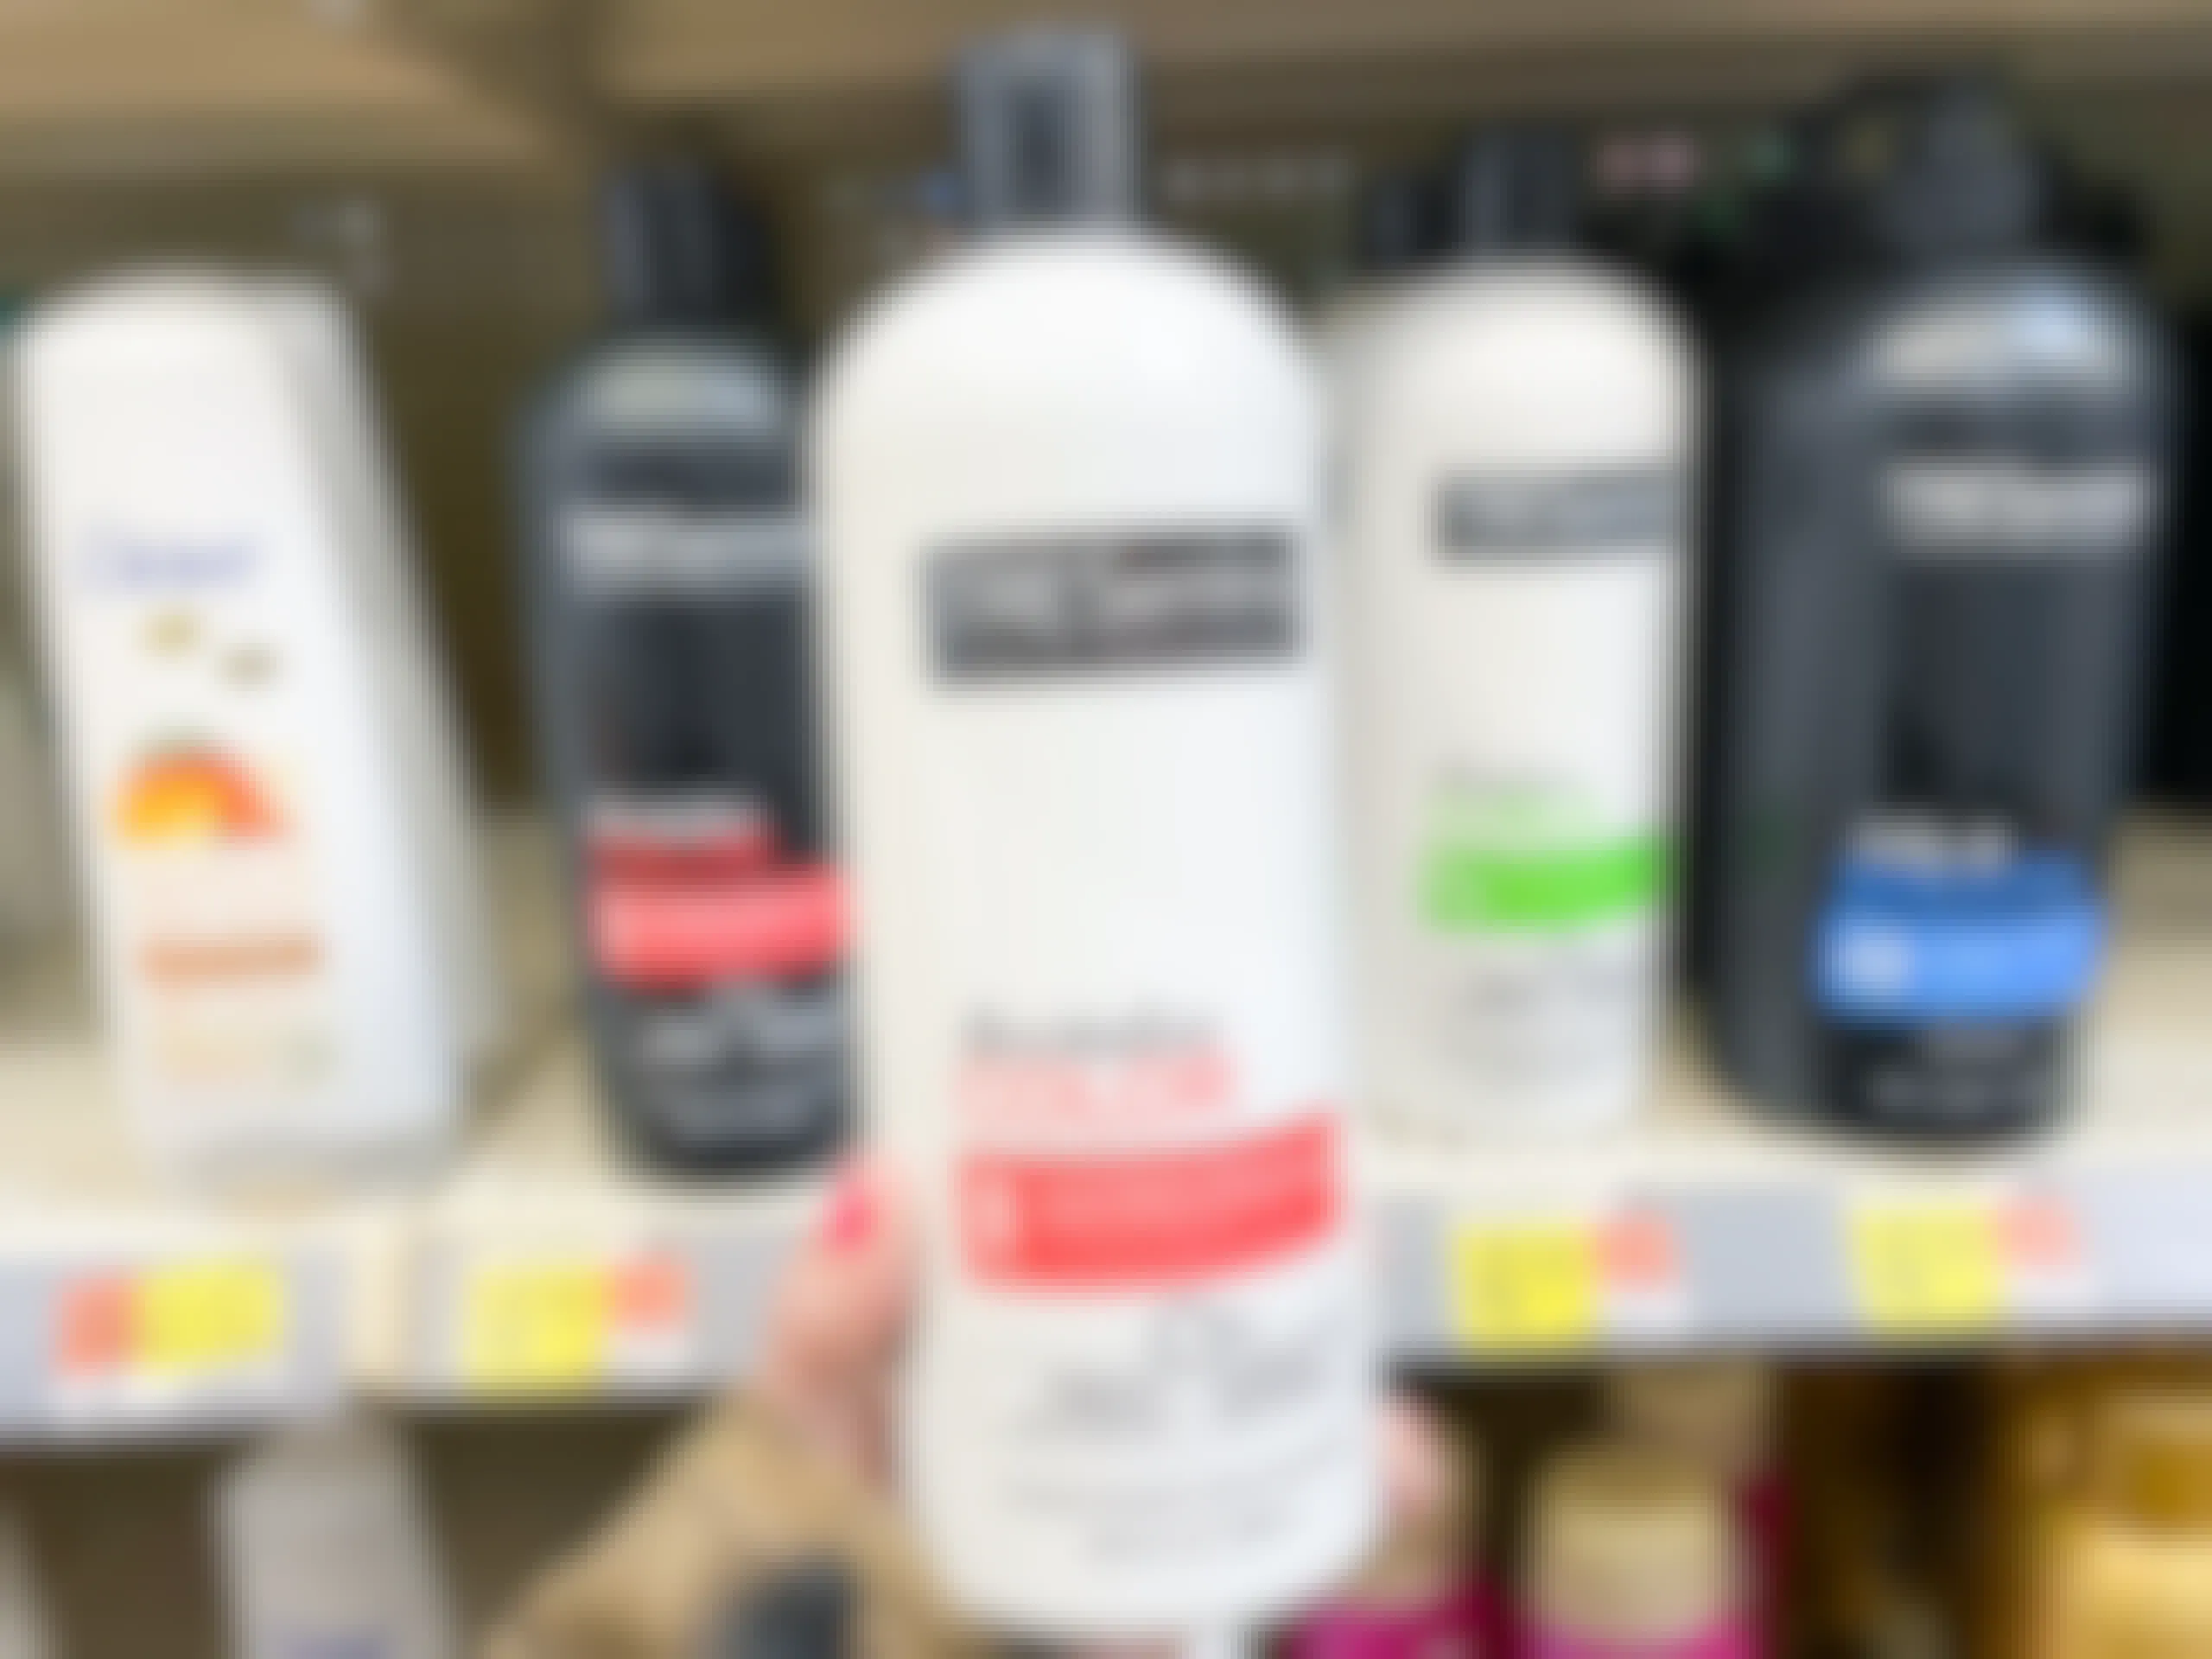 Tresemme Pro Solutions Conditioner at Walmart